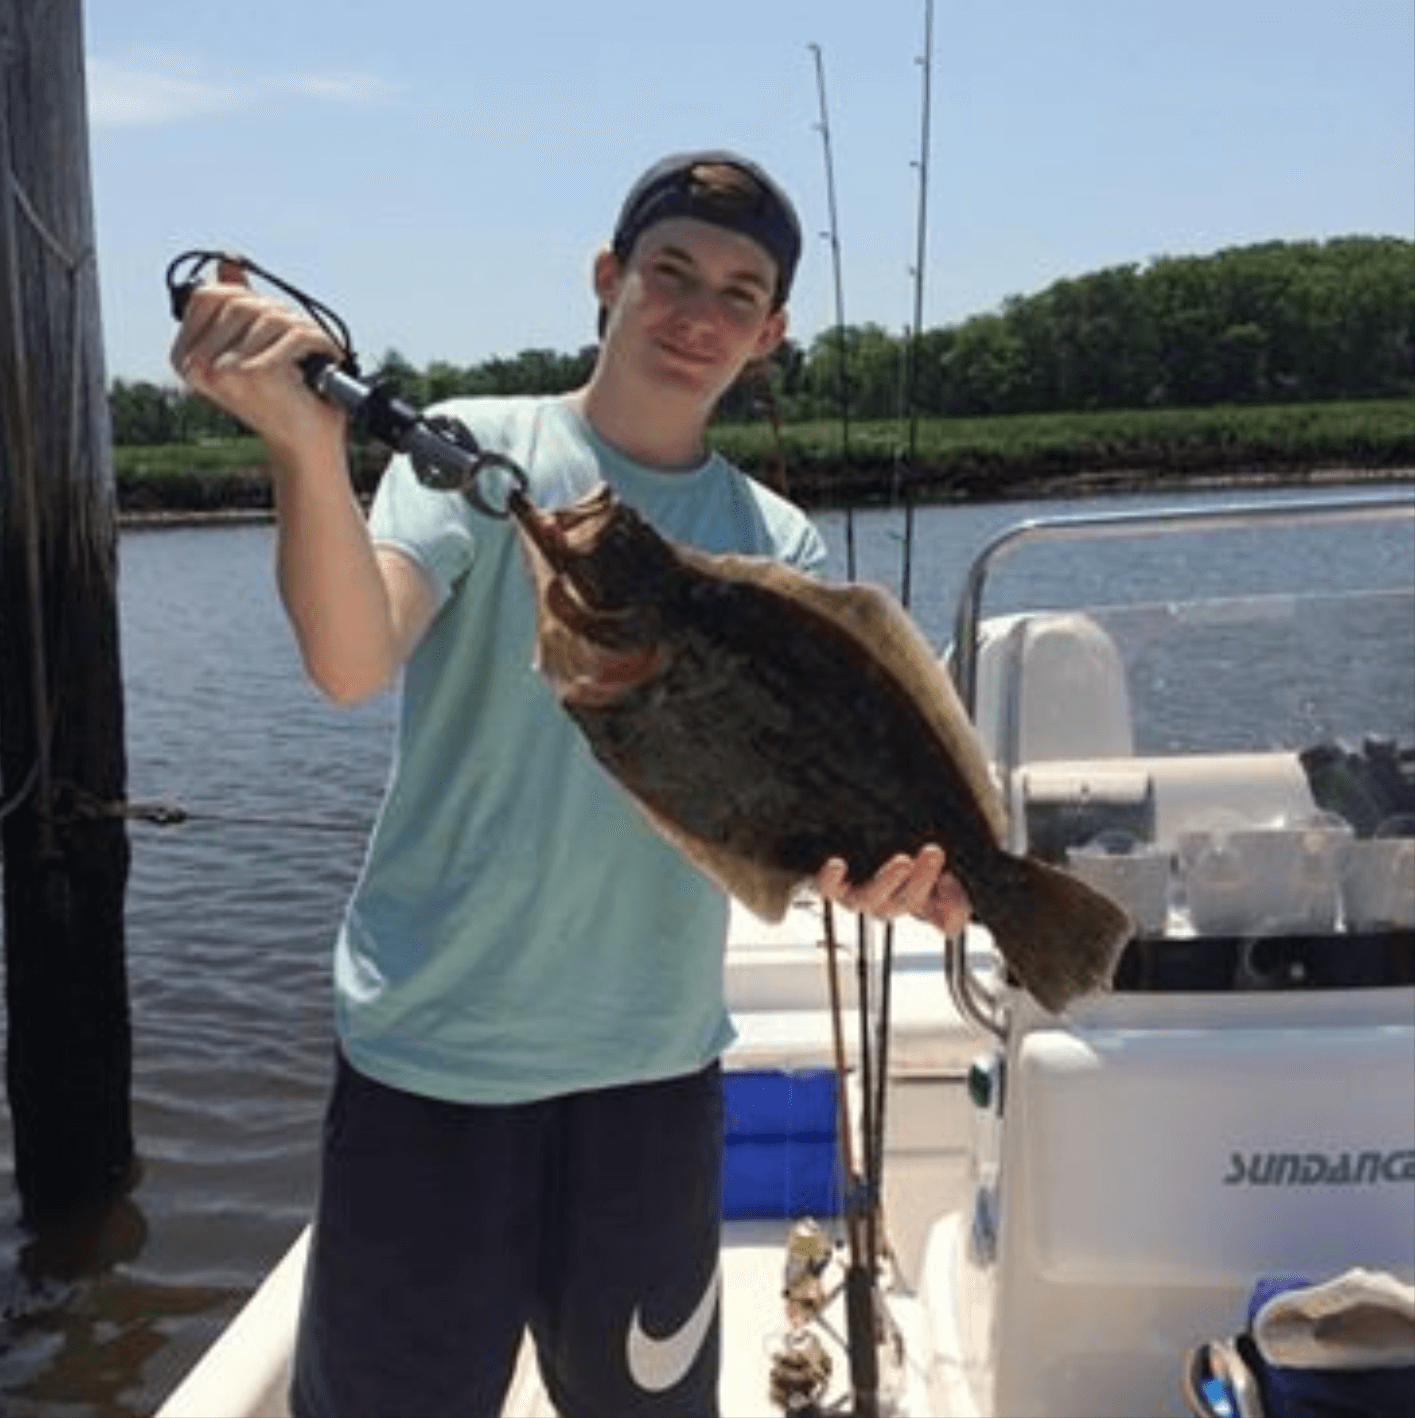 The Fishing Line June 6 - Cape May County Herald